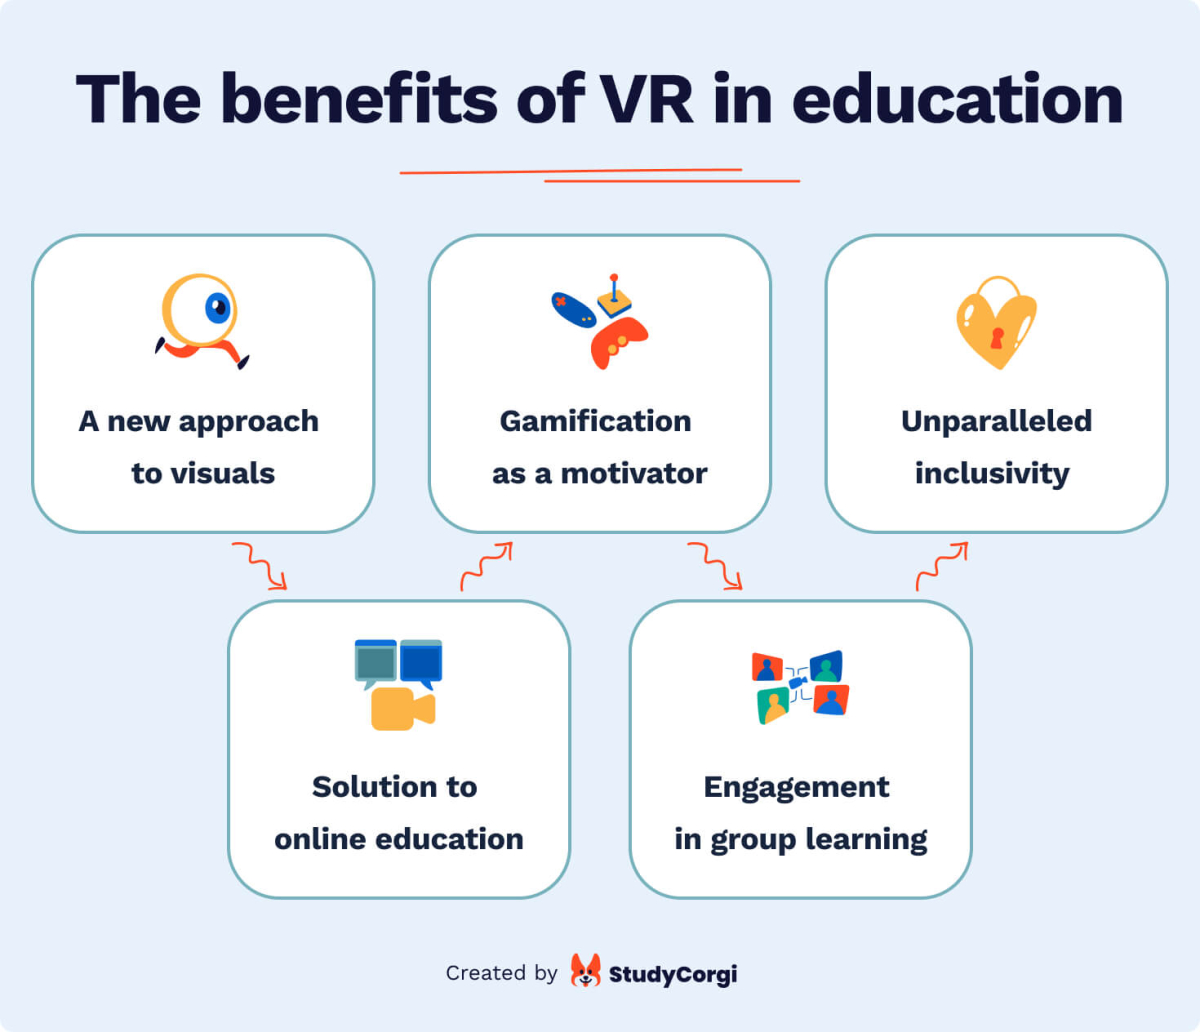 The picture lists the benefits of using VR in education.